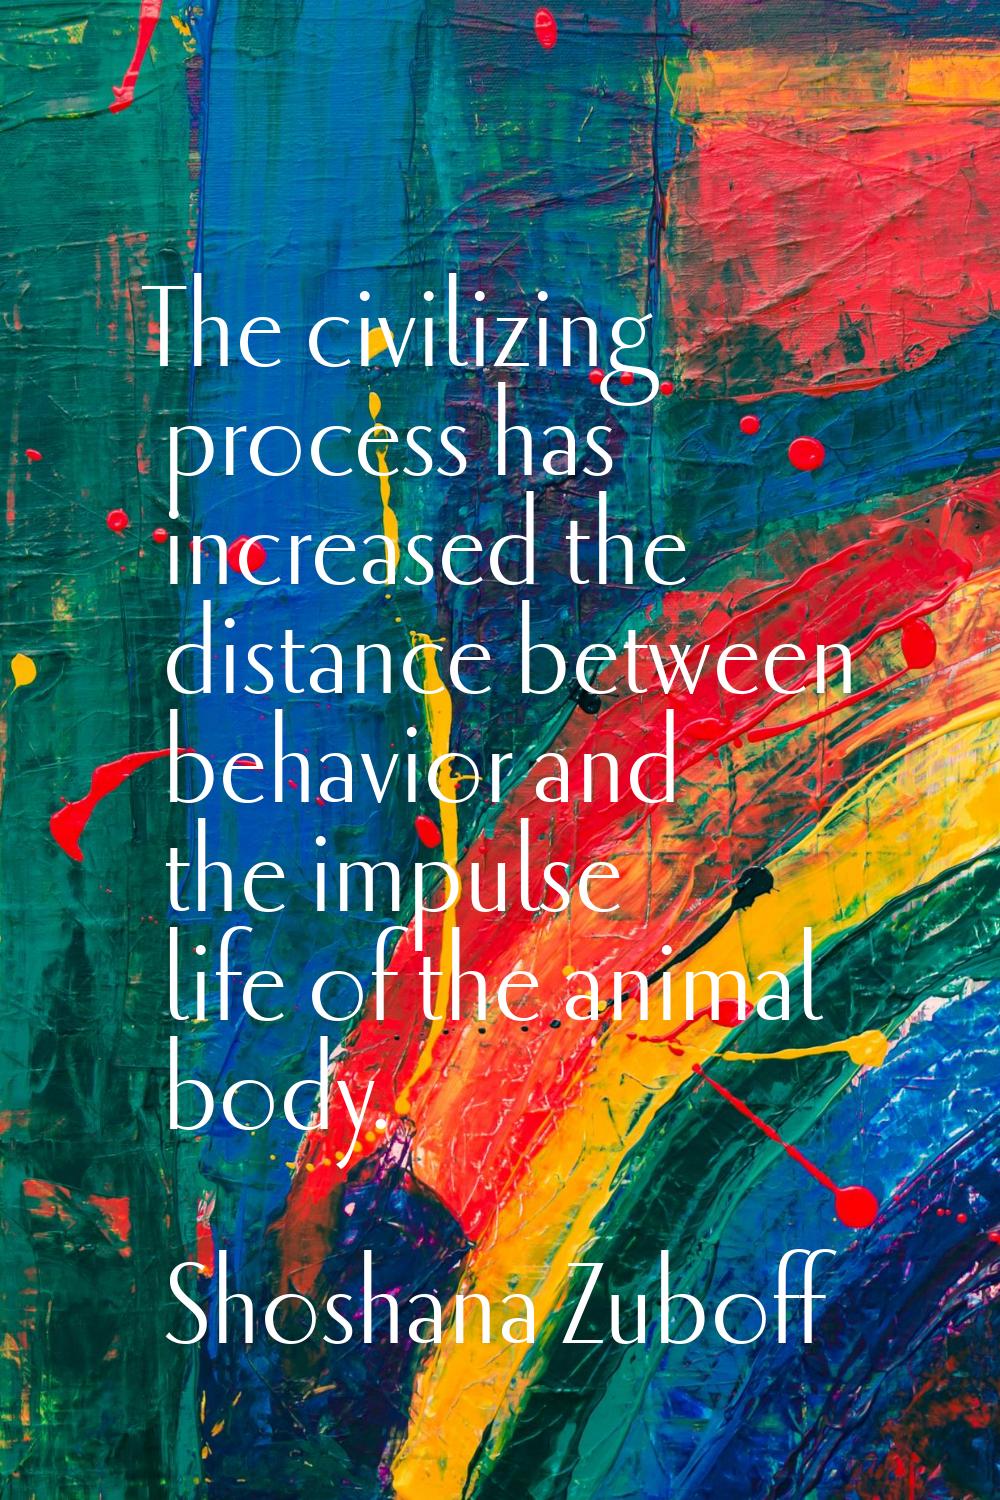 The civilizing process has increased the distance between behavior and the impulse life of the anim